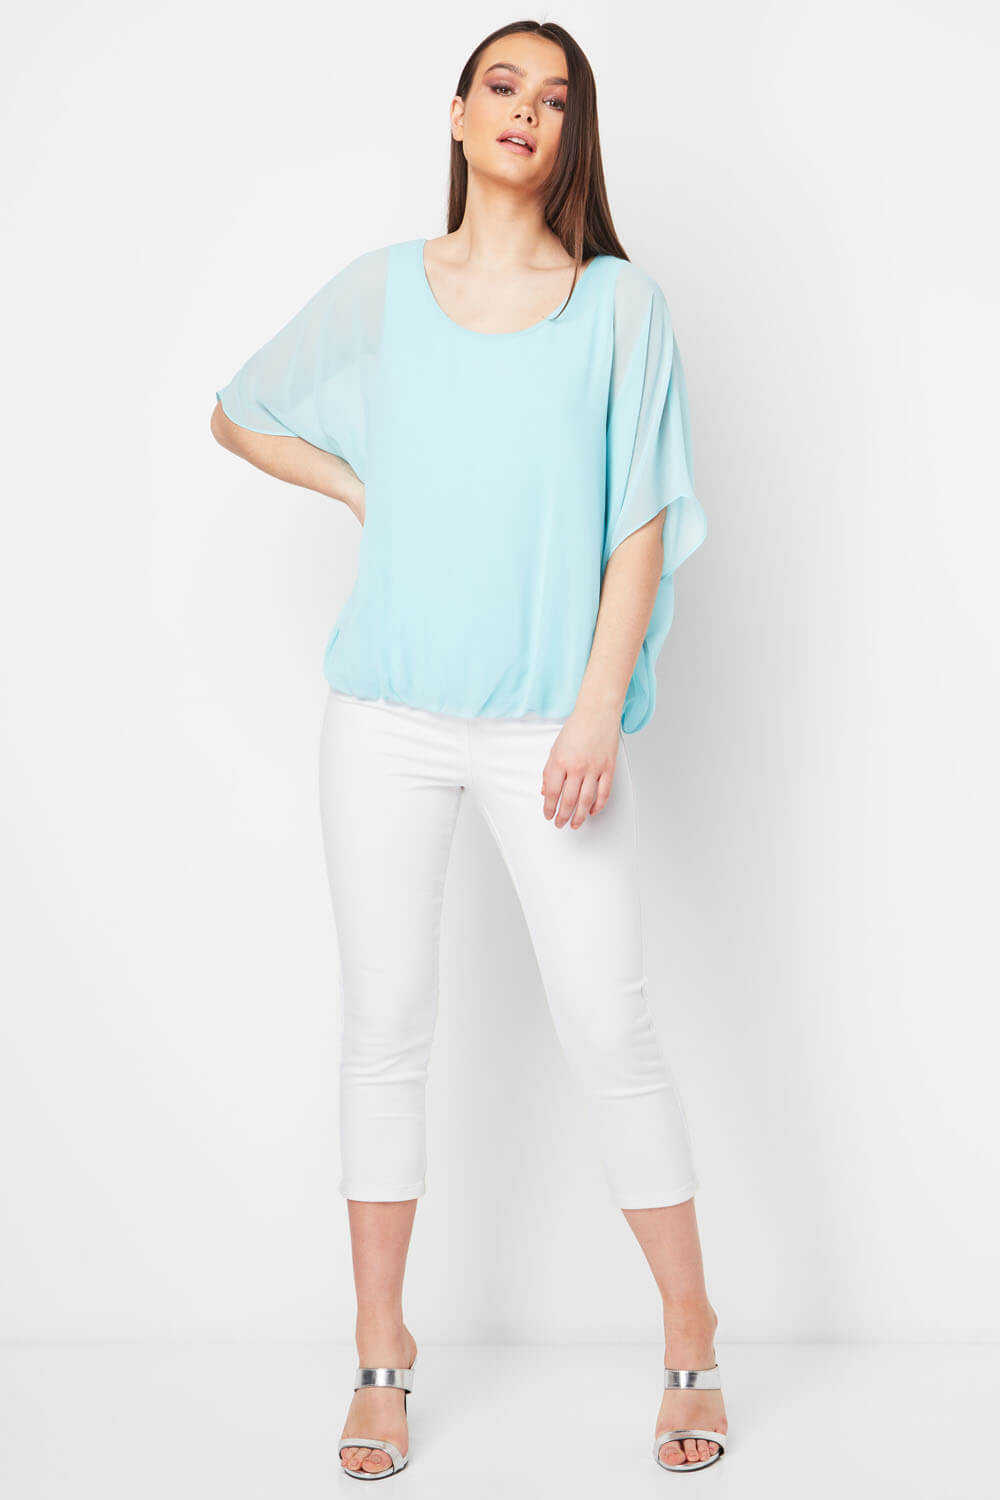 Turquoise Bubble Hem Top, Image 2 of 8